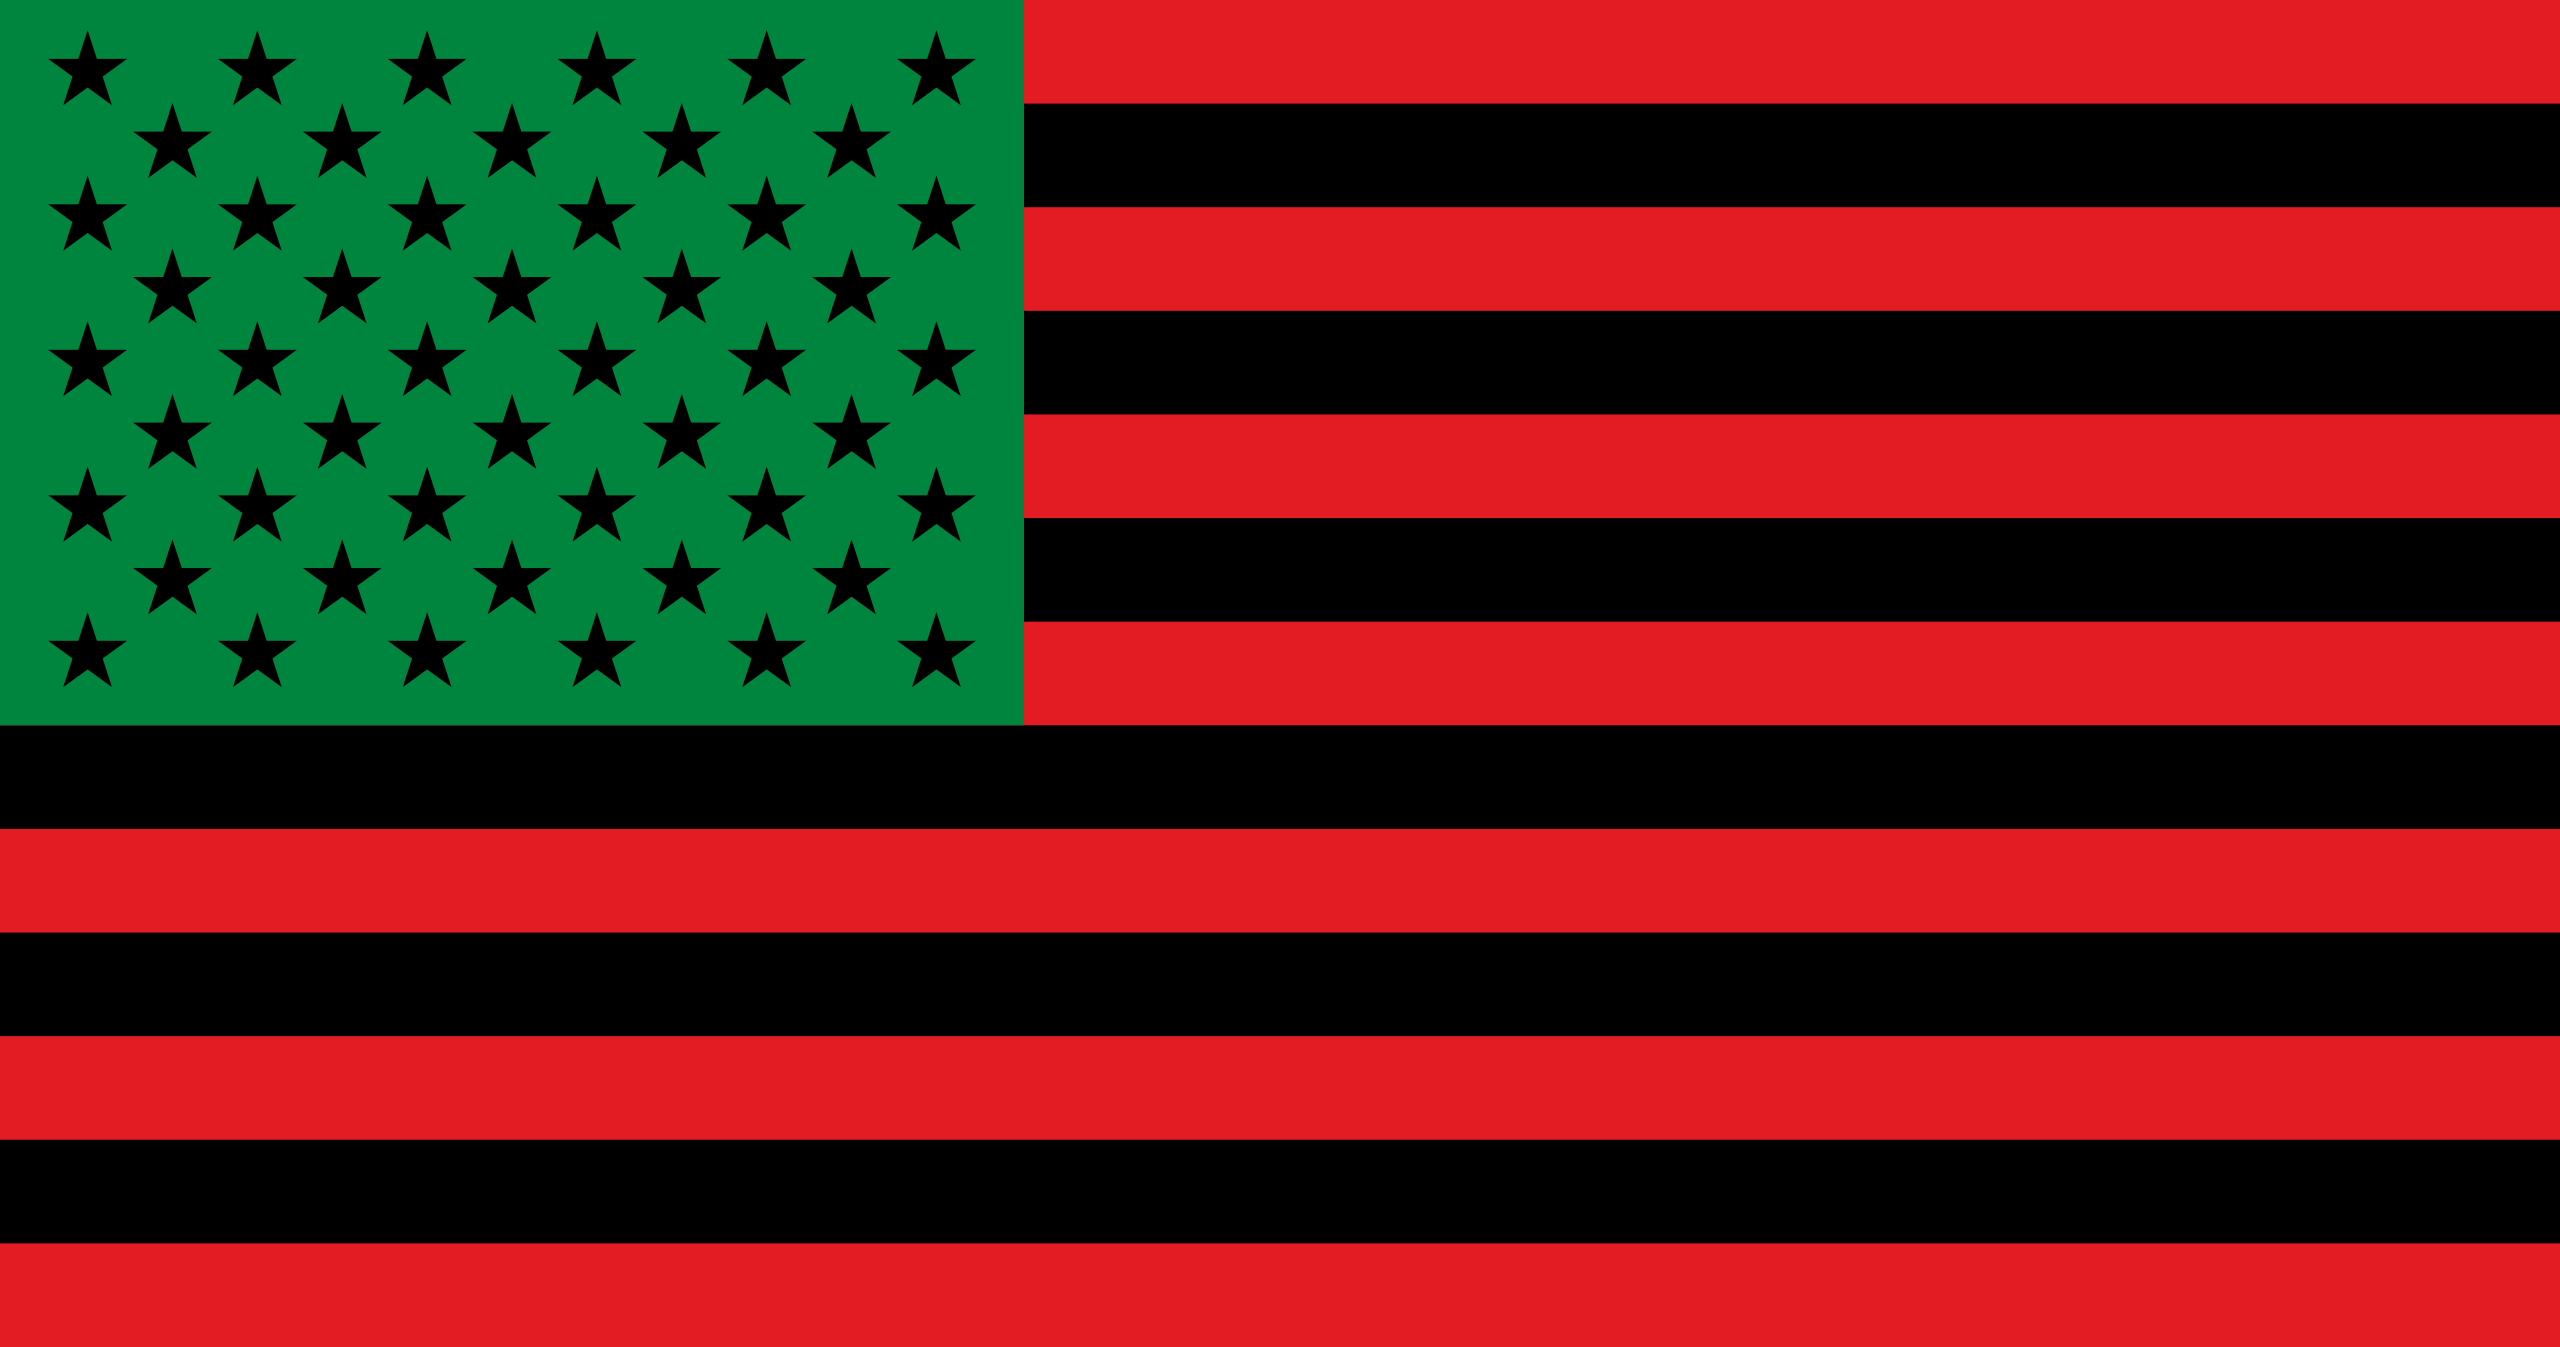 African American Flag created by David Hammons by combining the US starts and stripes with the colours from the Pan-African Flag.